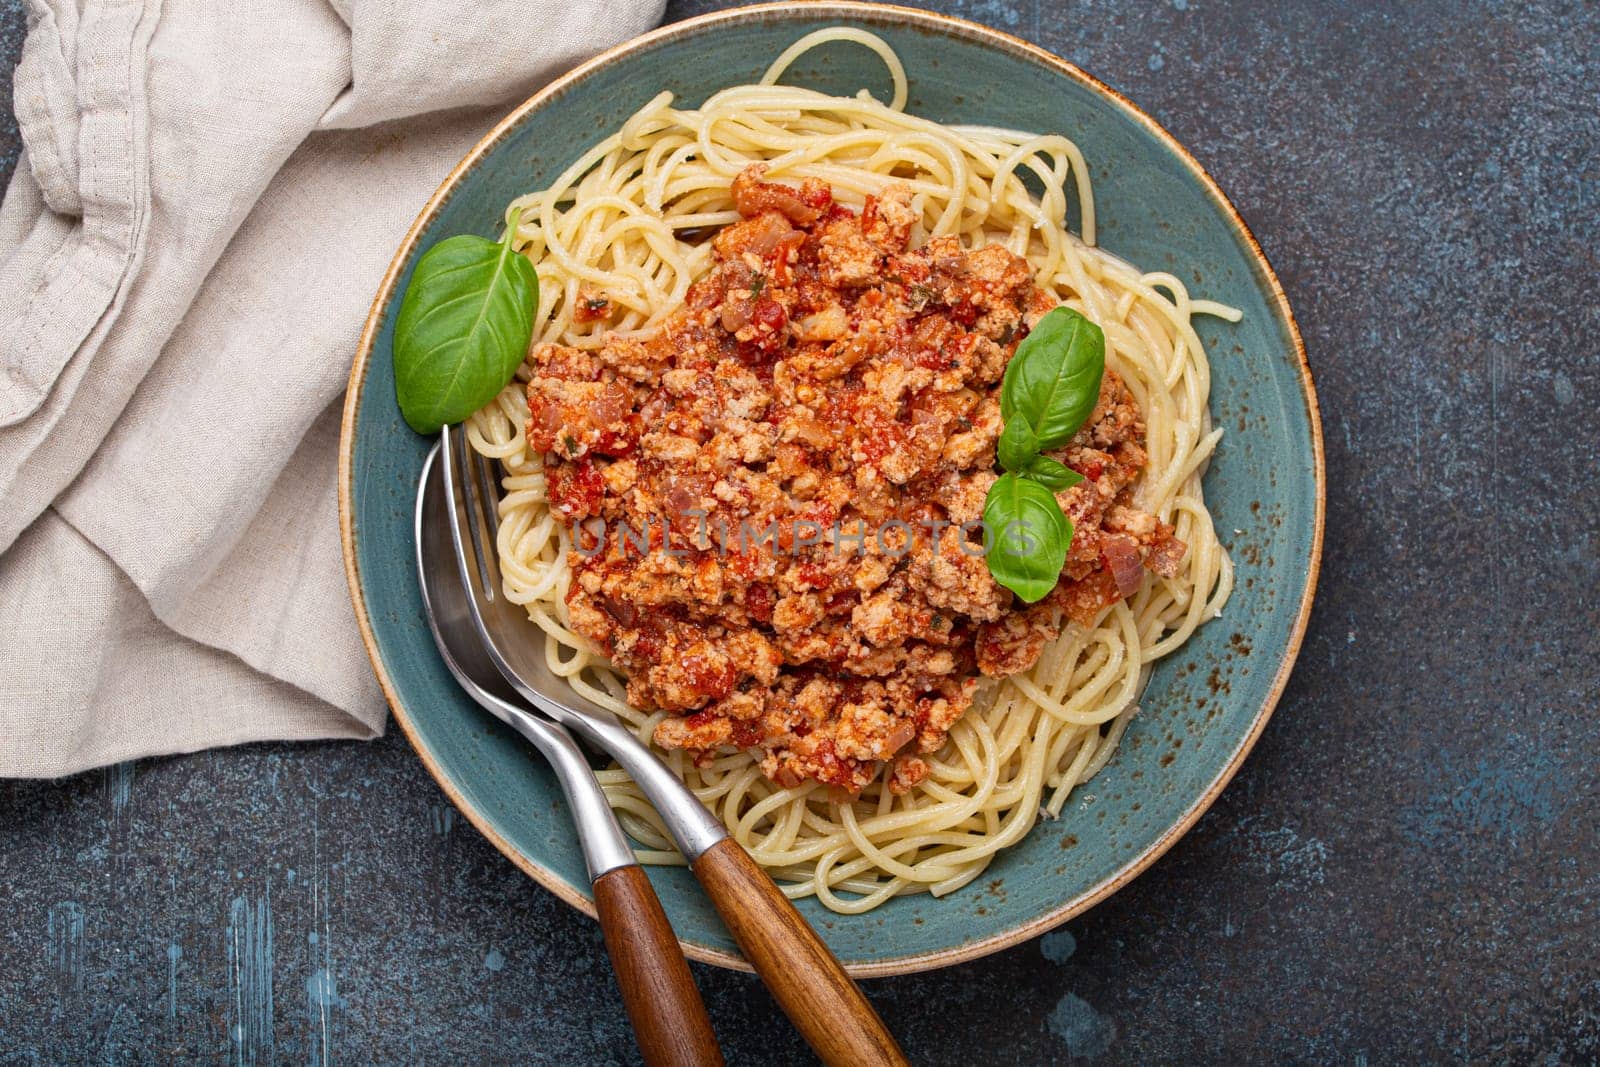 Delicious spaghetti with bolognese sauce served on rustic plate by its_al_dente